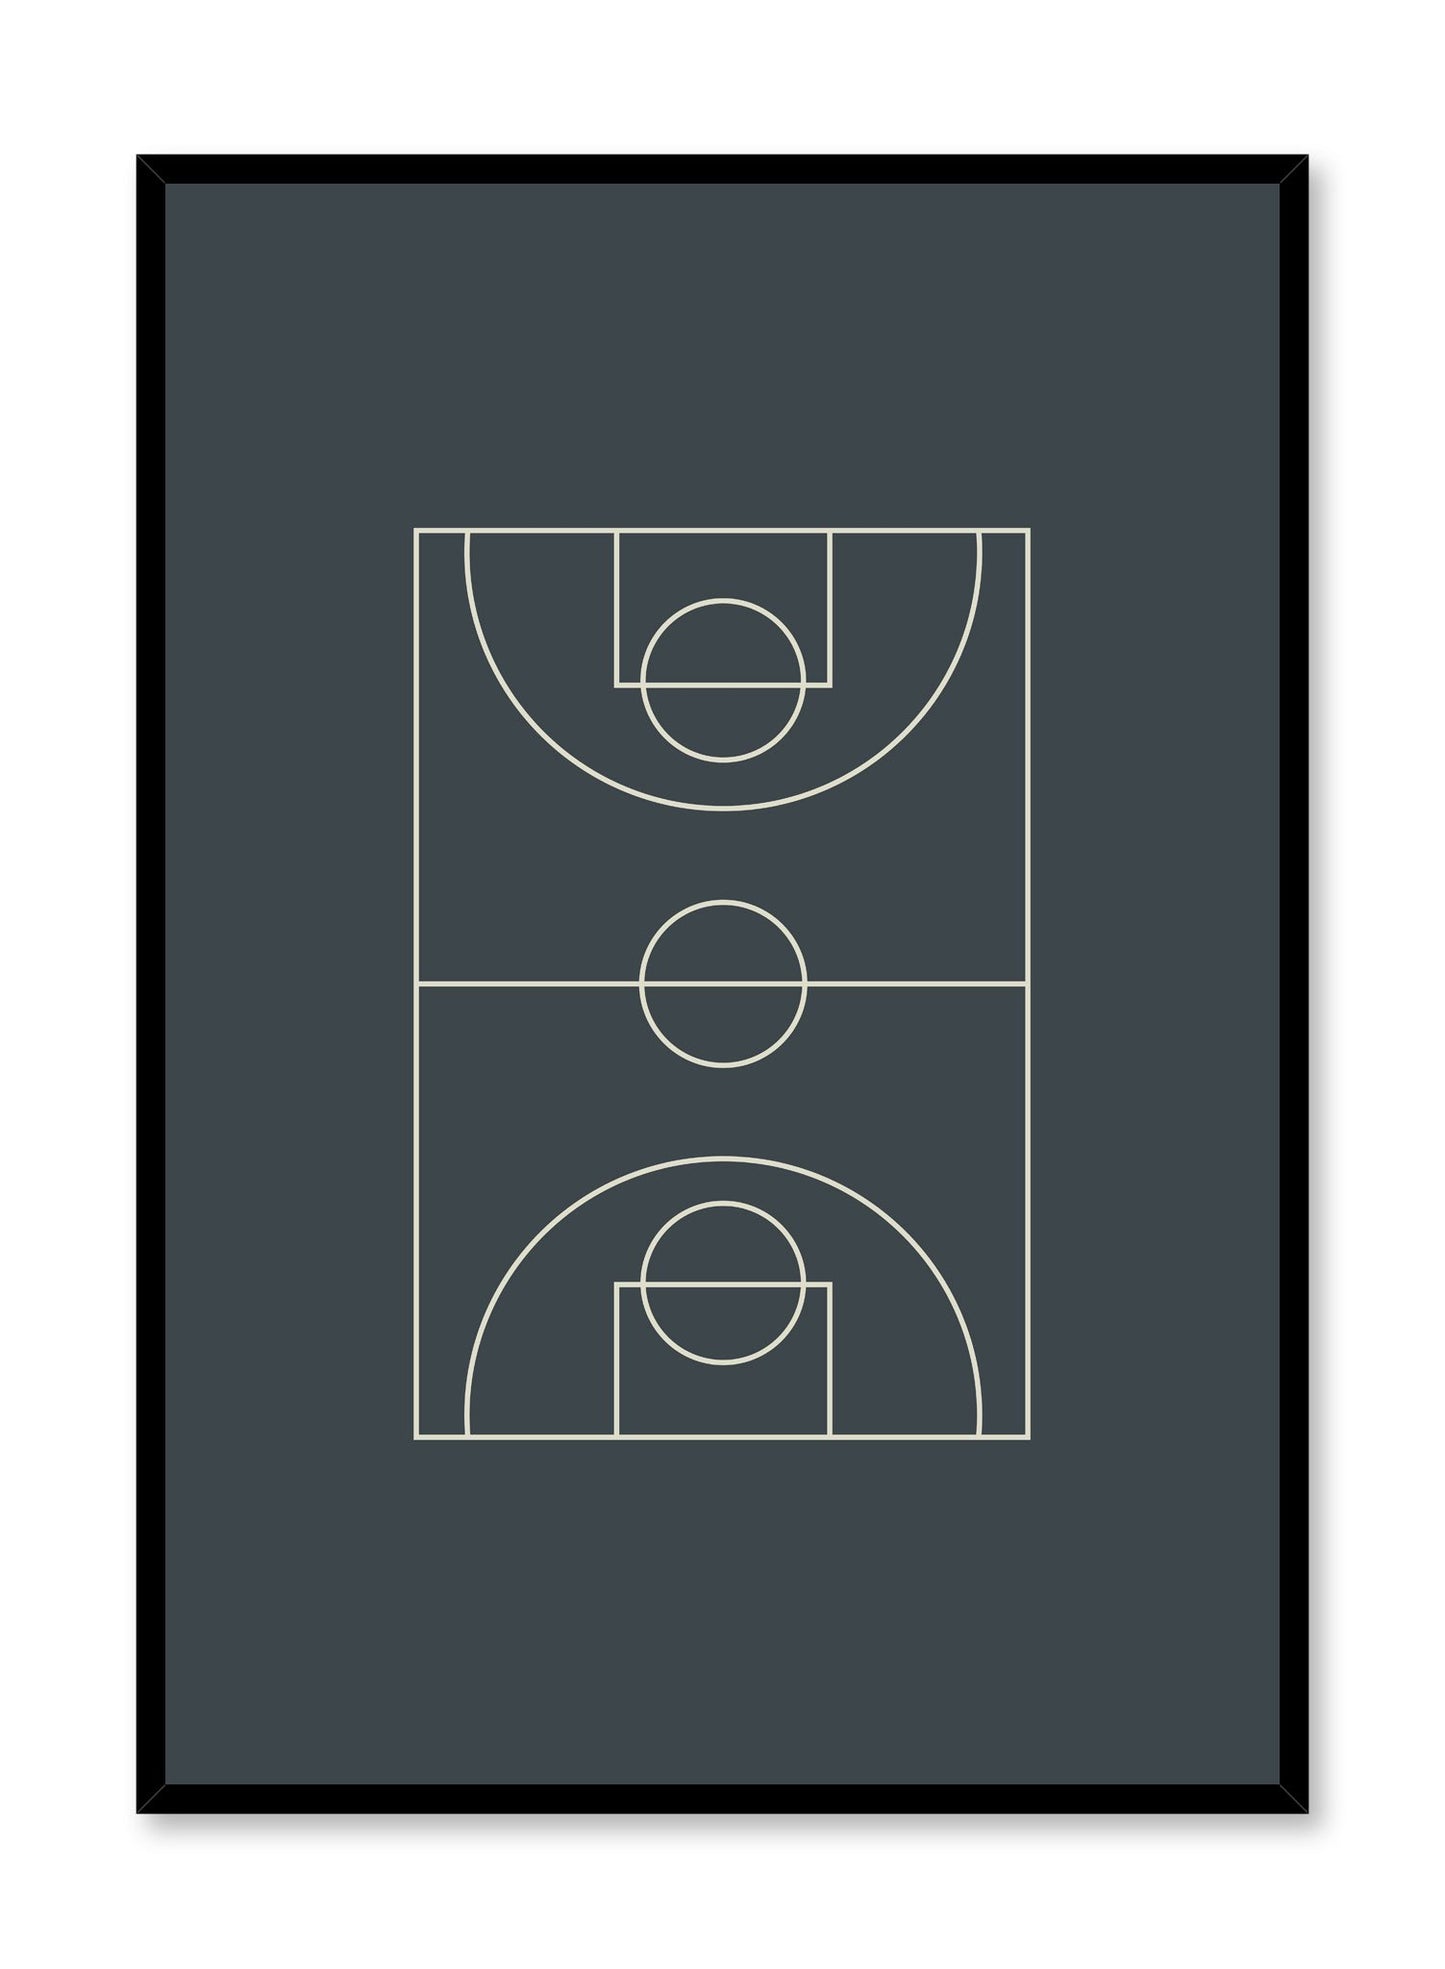 Minimalist design poster by Opposite Wall with Baseline abstract graphic design basketball court in grey